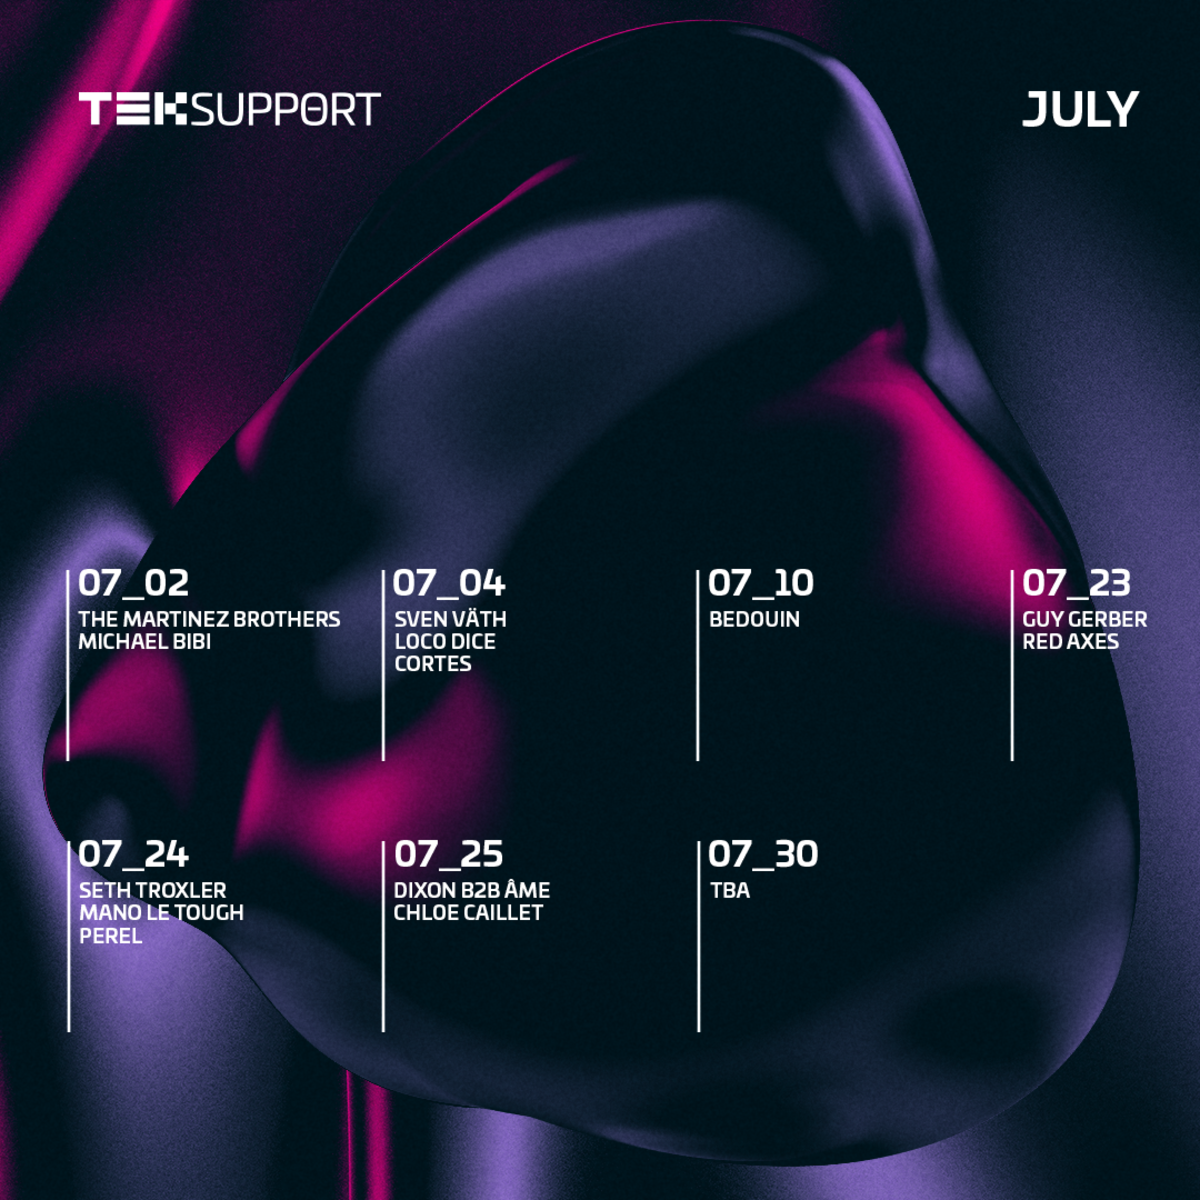 Teksupport's event lineup for July 2021